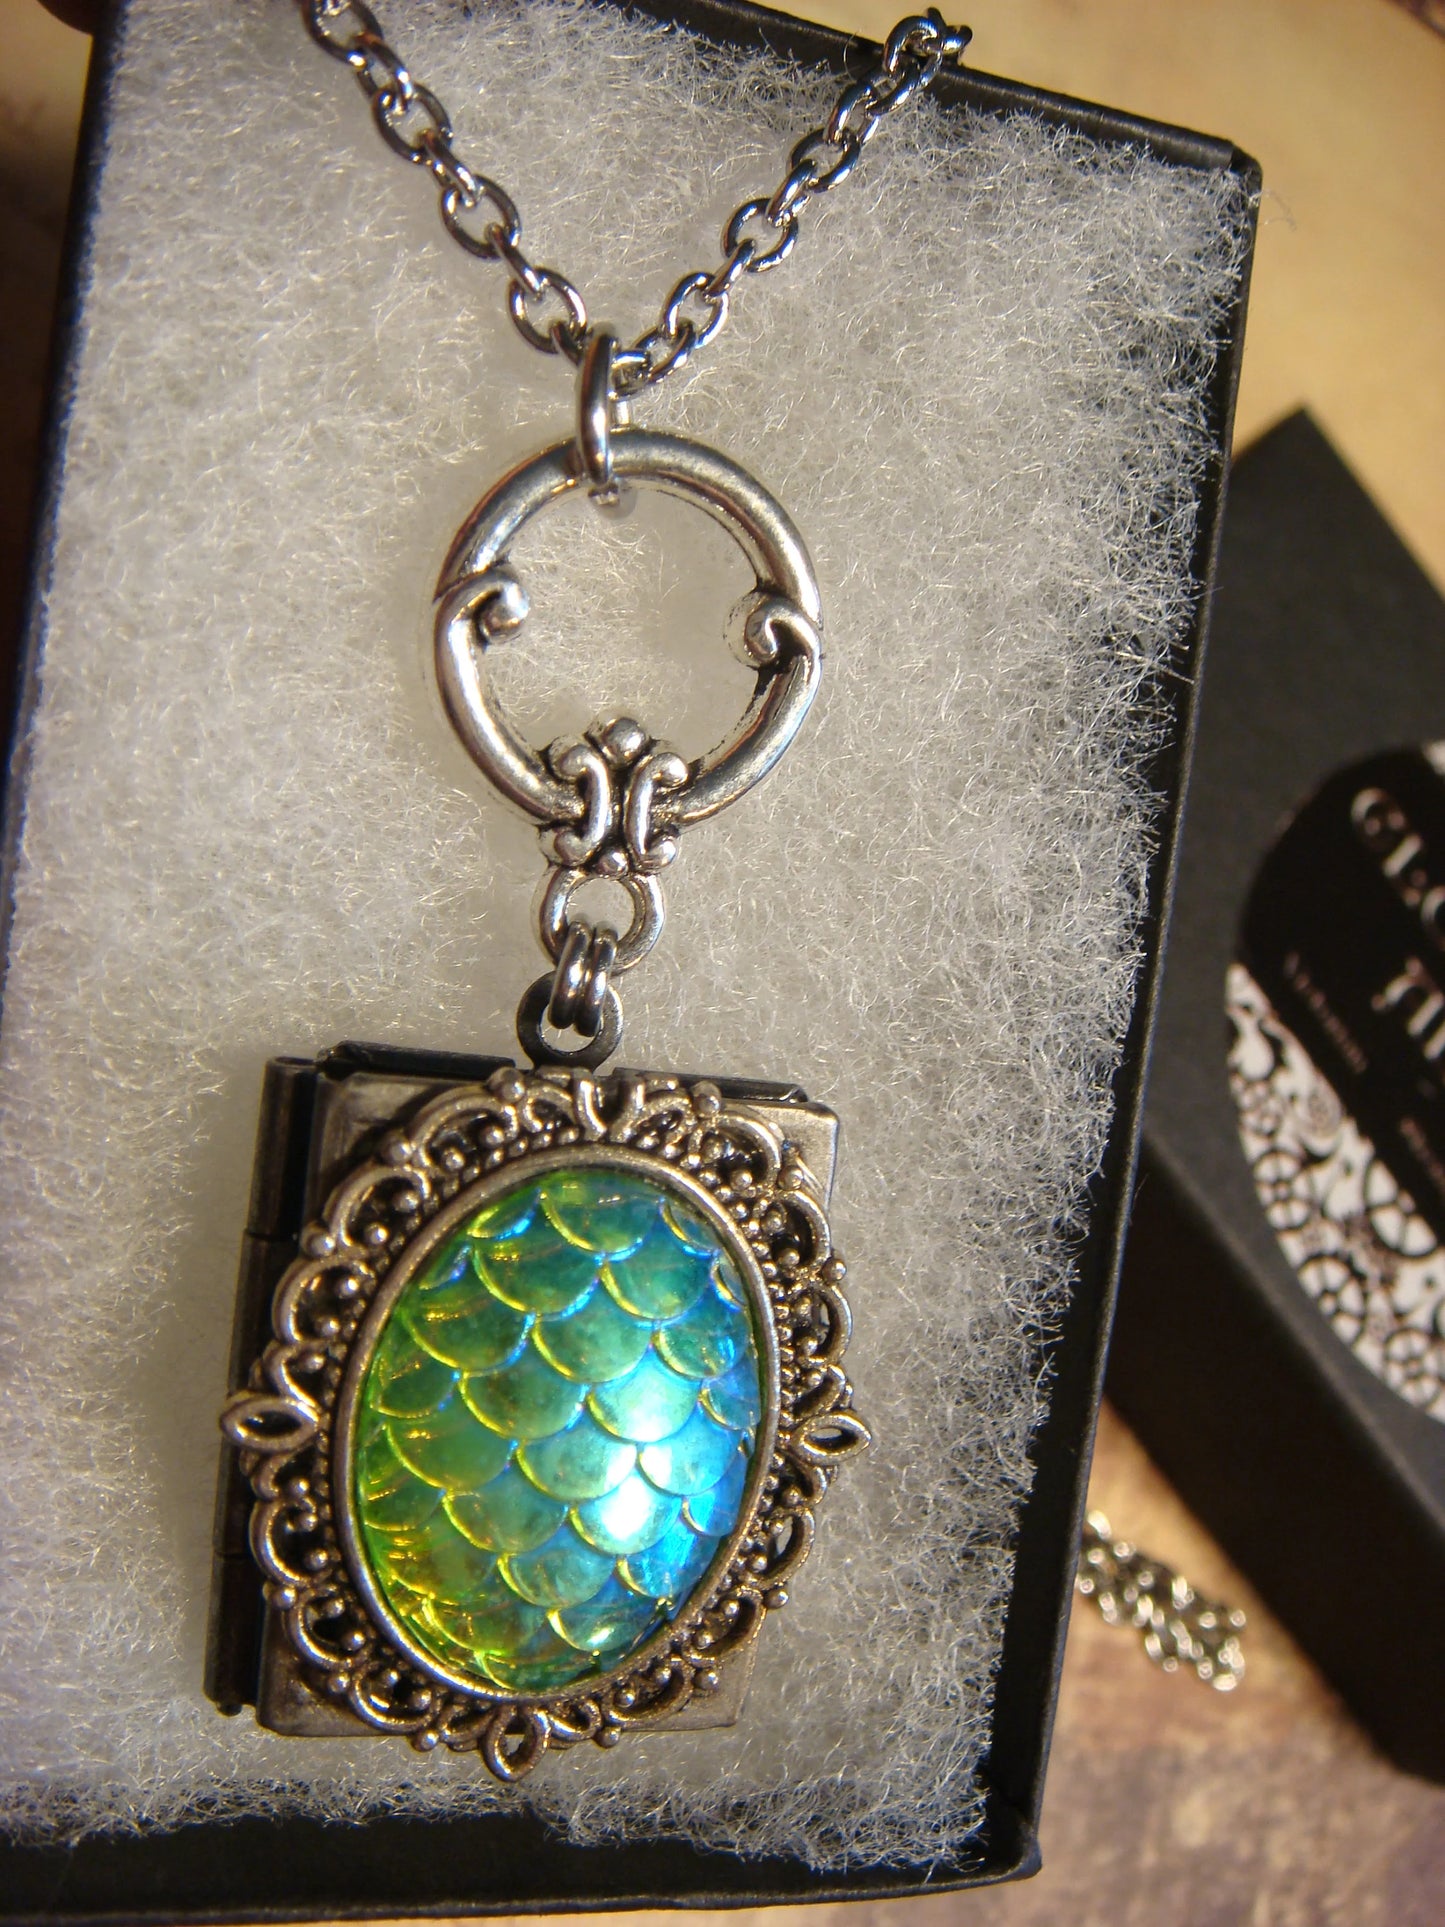 Iridescent Blue Green Scales Ornate Book Locket Necklace